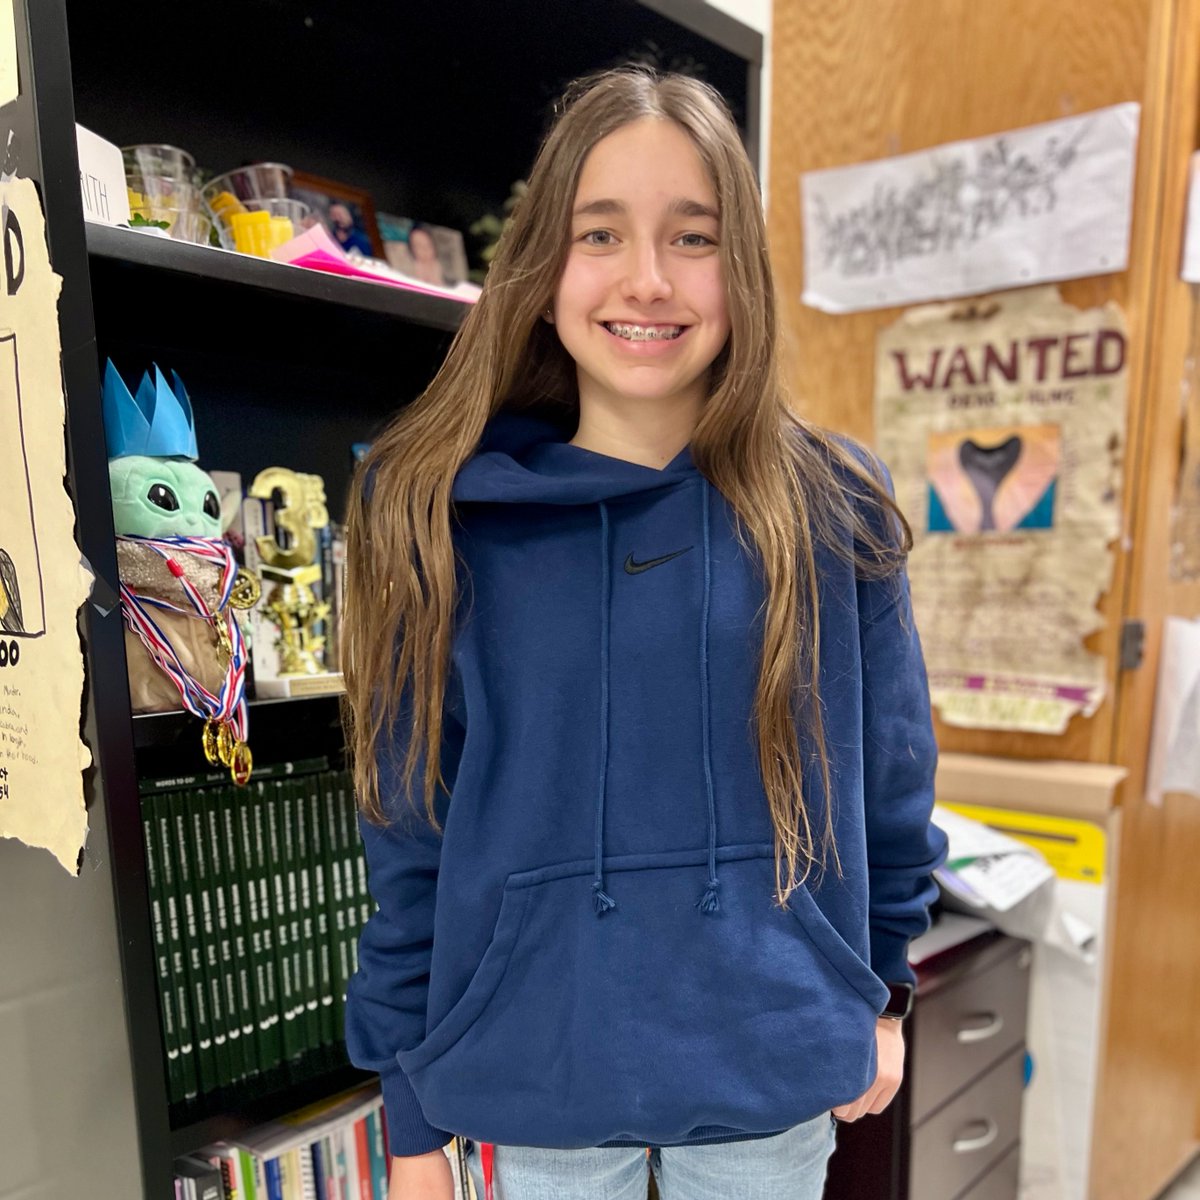 7th grader Ily Lopez shared her academic goal for 2024. 'My goal for the new year is to get Masters on all my STAAR exams. I plan on achieving this by studying hard, focusing in class, & asking for help when I need it.' Way to pursue your dreams, Ily!! #SpartanSpotlight